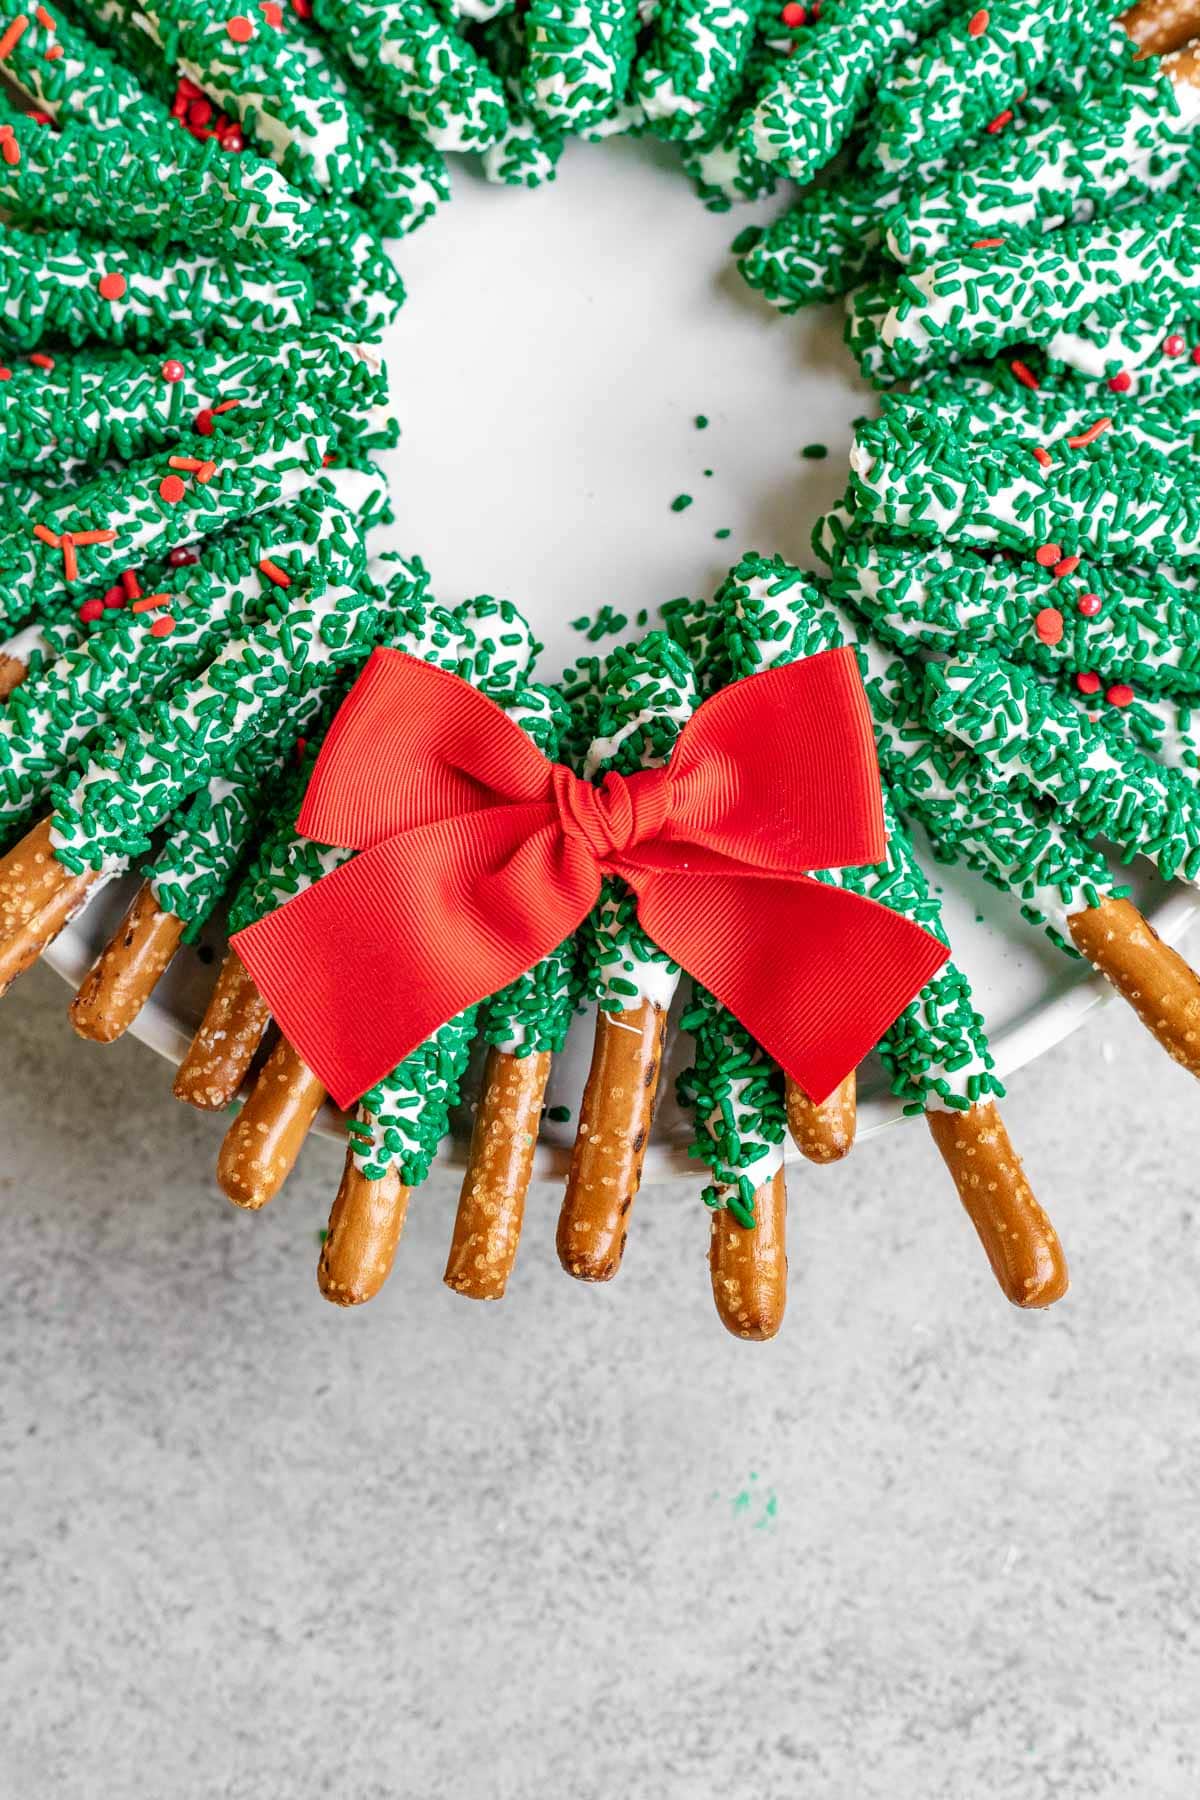 Chocolate Pretzel Wreath white chocolate coated pretzel sticks with green sanding sugar arranged as a wreath with a red bow